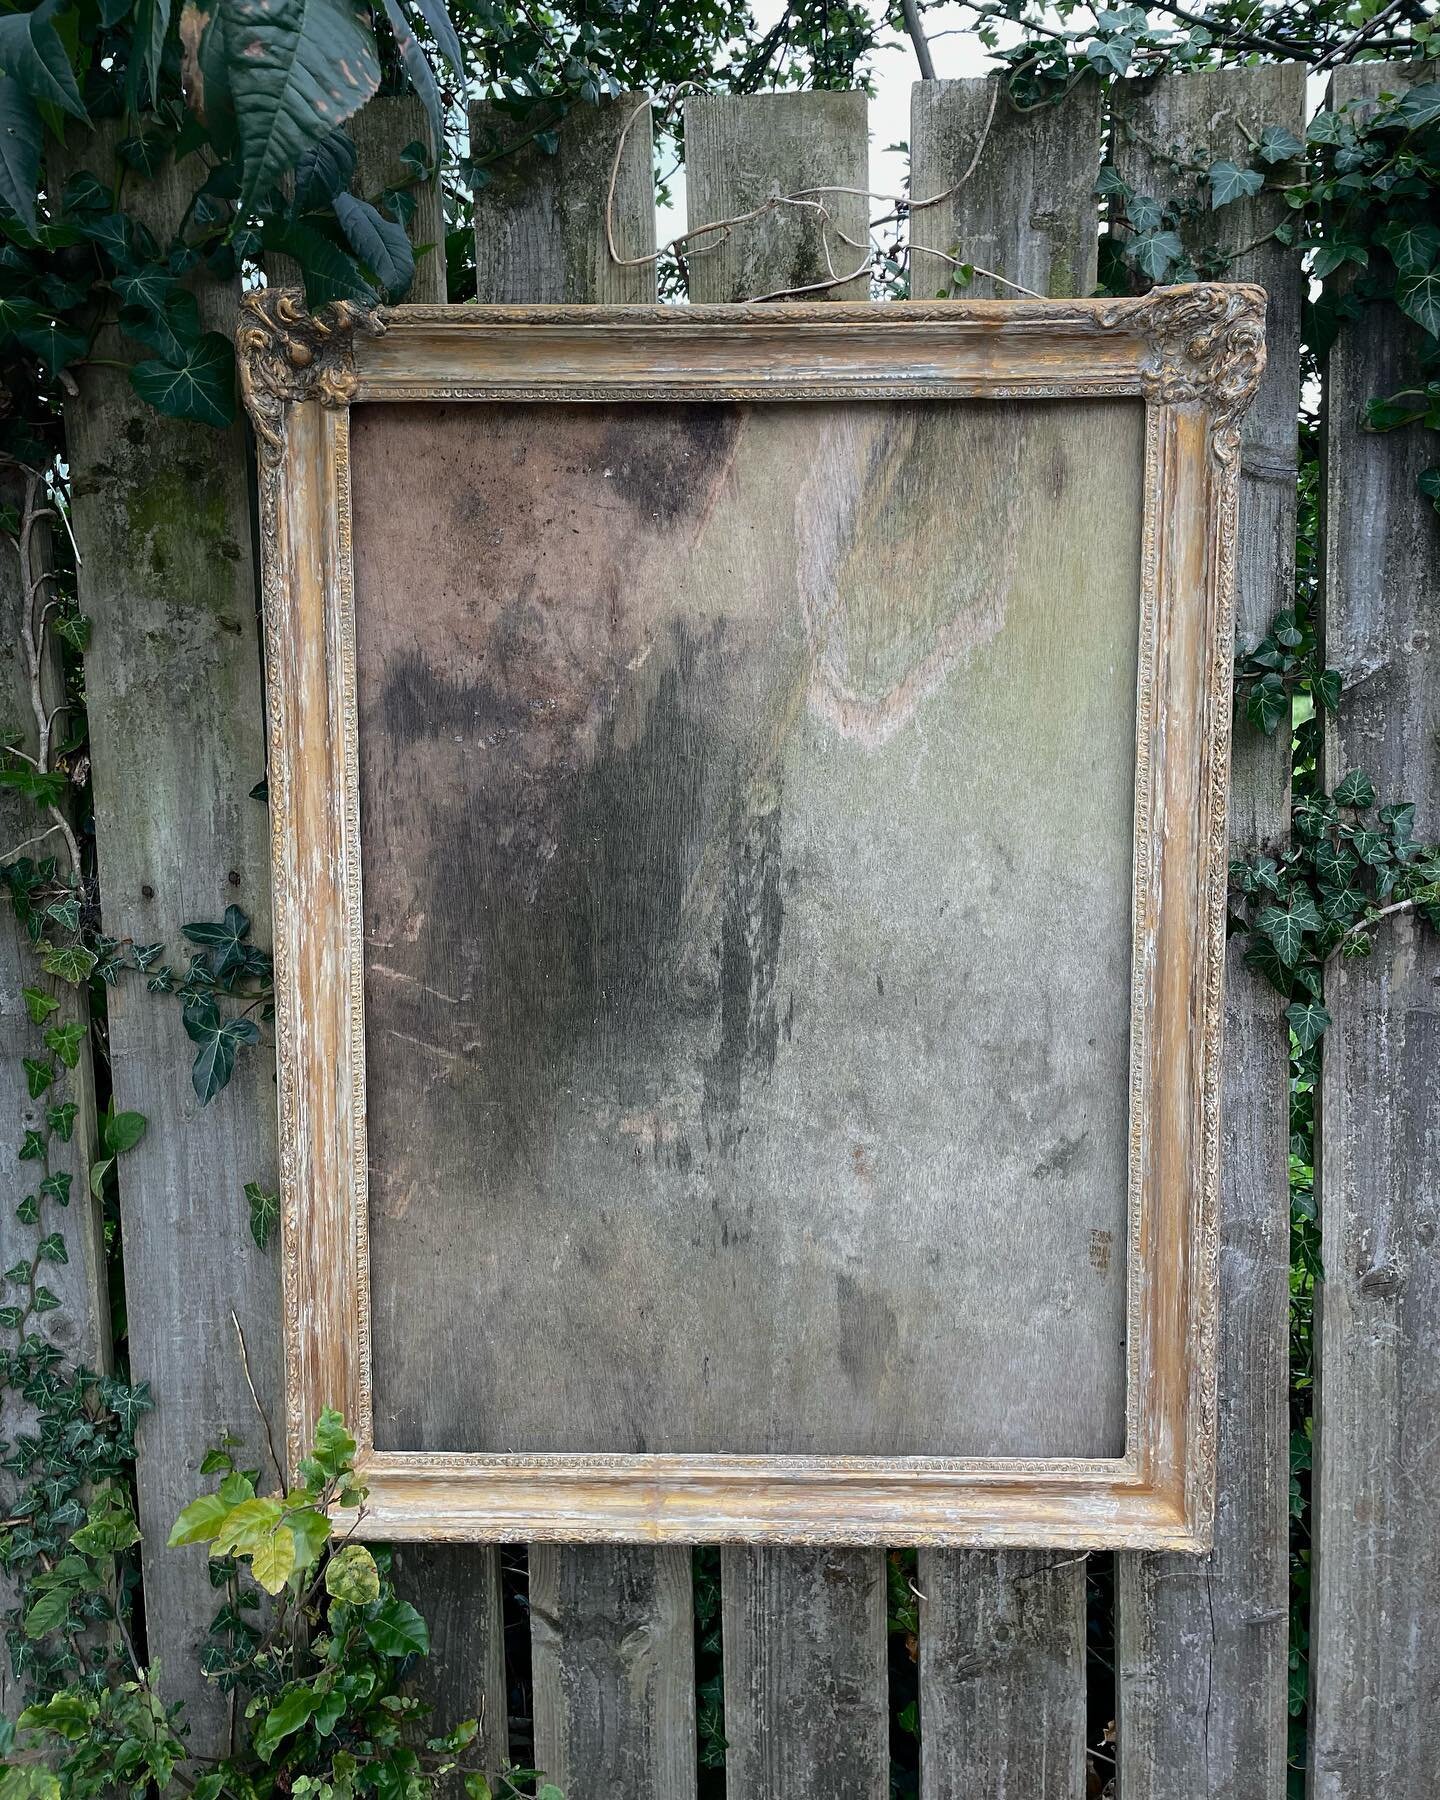 part restored antique frame found in pieces in a skip w a thick coat of white paint. stripped it back, cut it to a rectangle then moulded and cast the intact areas to replace all broken parts. 

was going to restore back to full gold but i liked the 